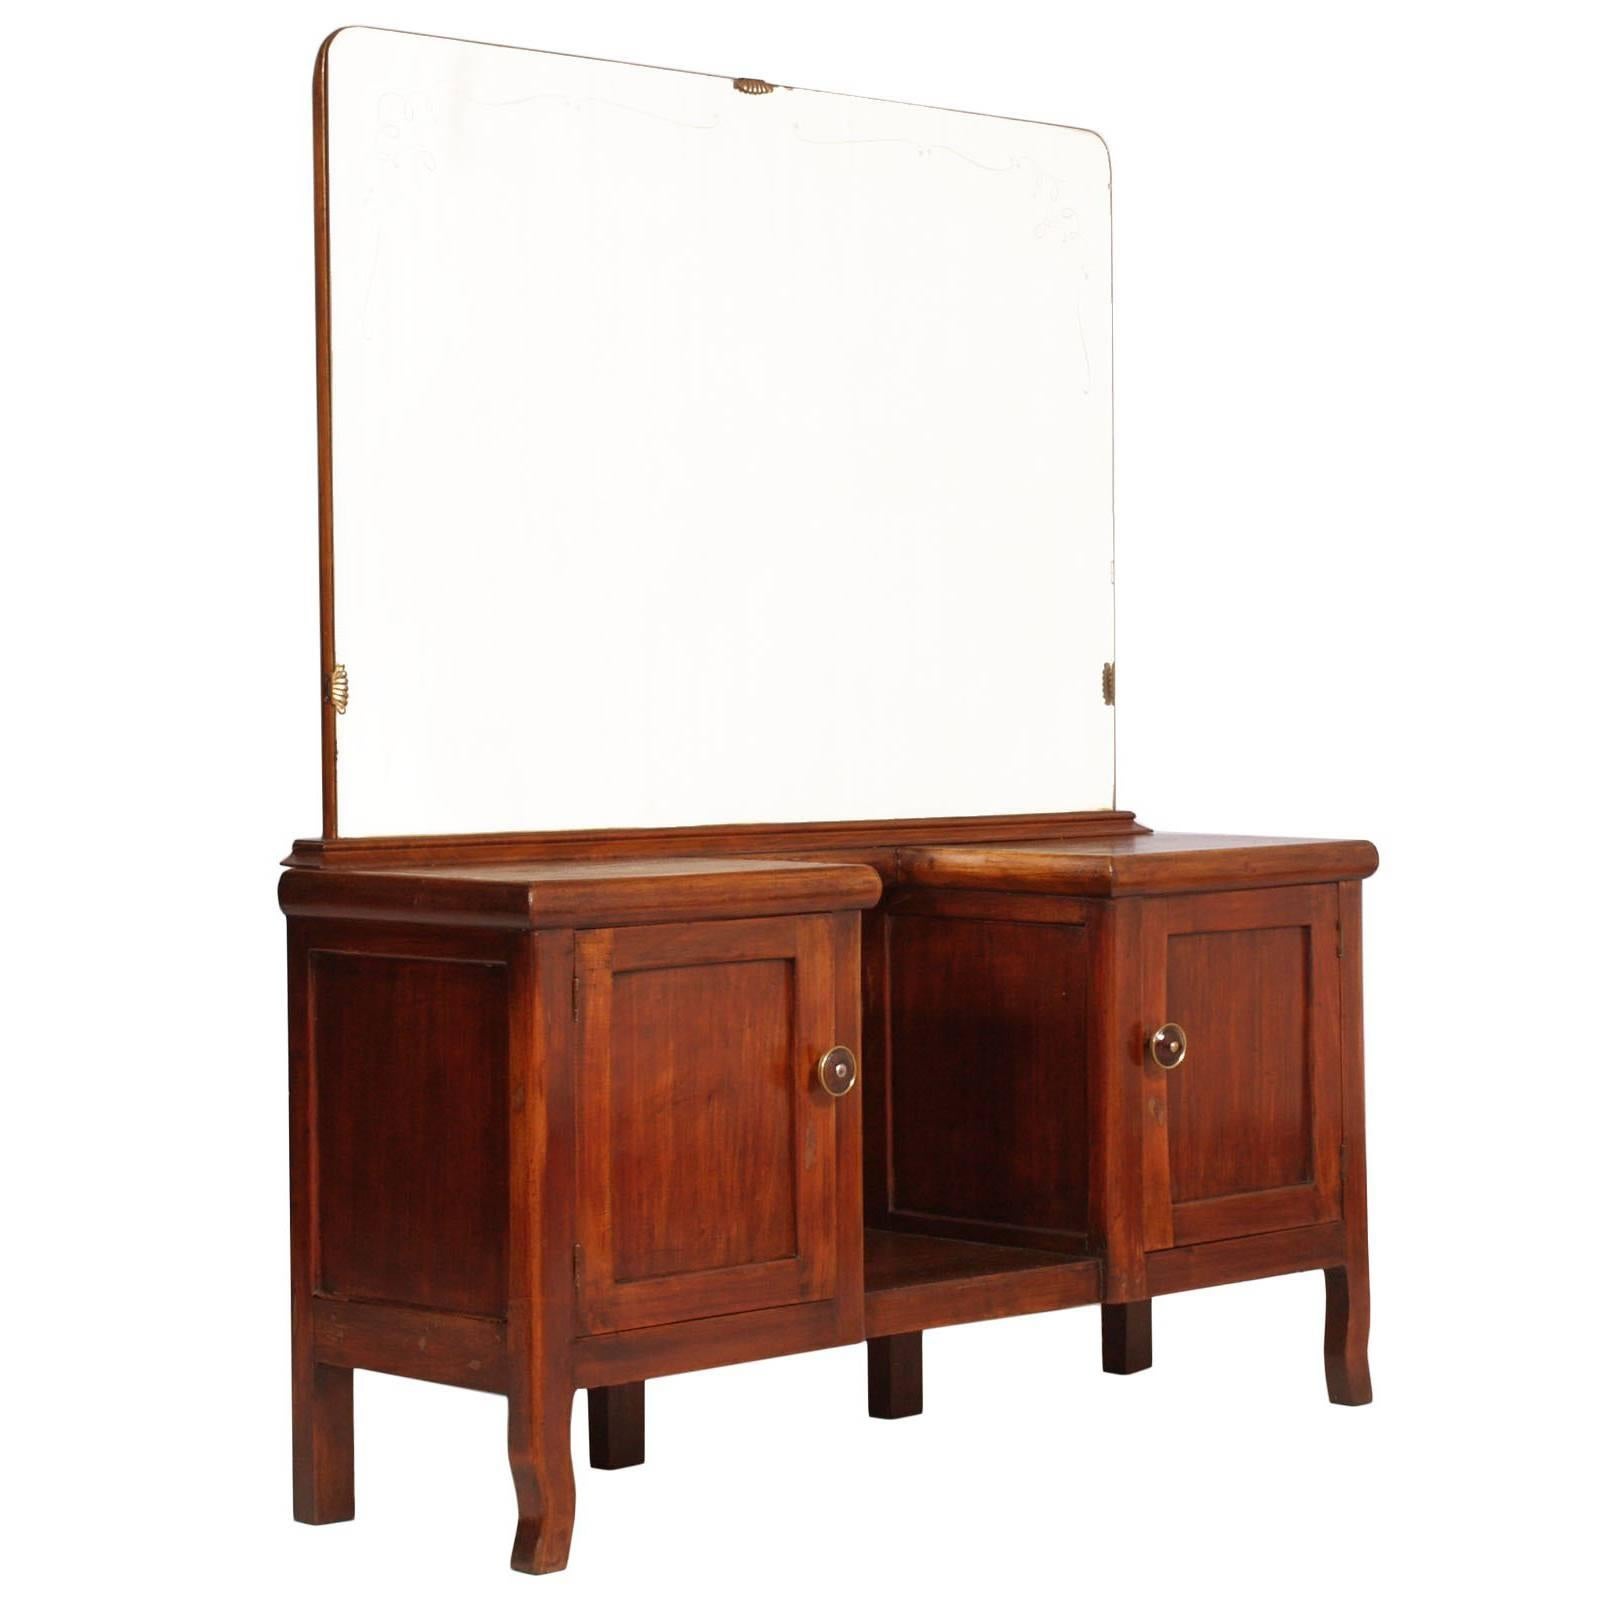 1930s Art Deco Entry Cabinet Console Table with Mirror in Walnut